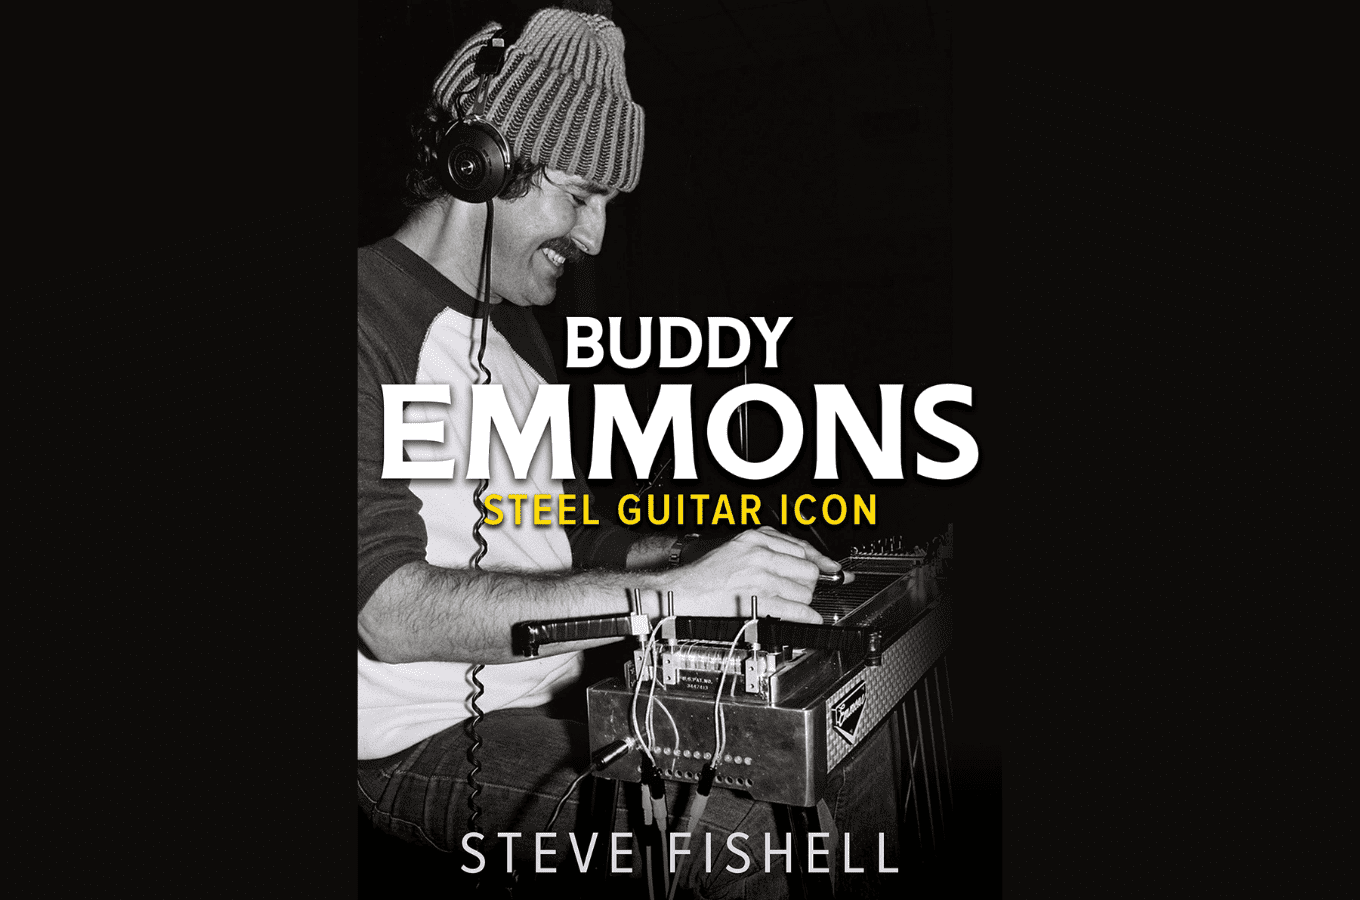 BOok cover image of Buddy Emmons pedal steel player